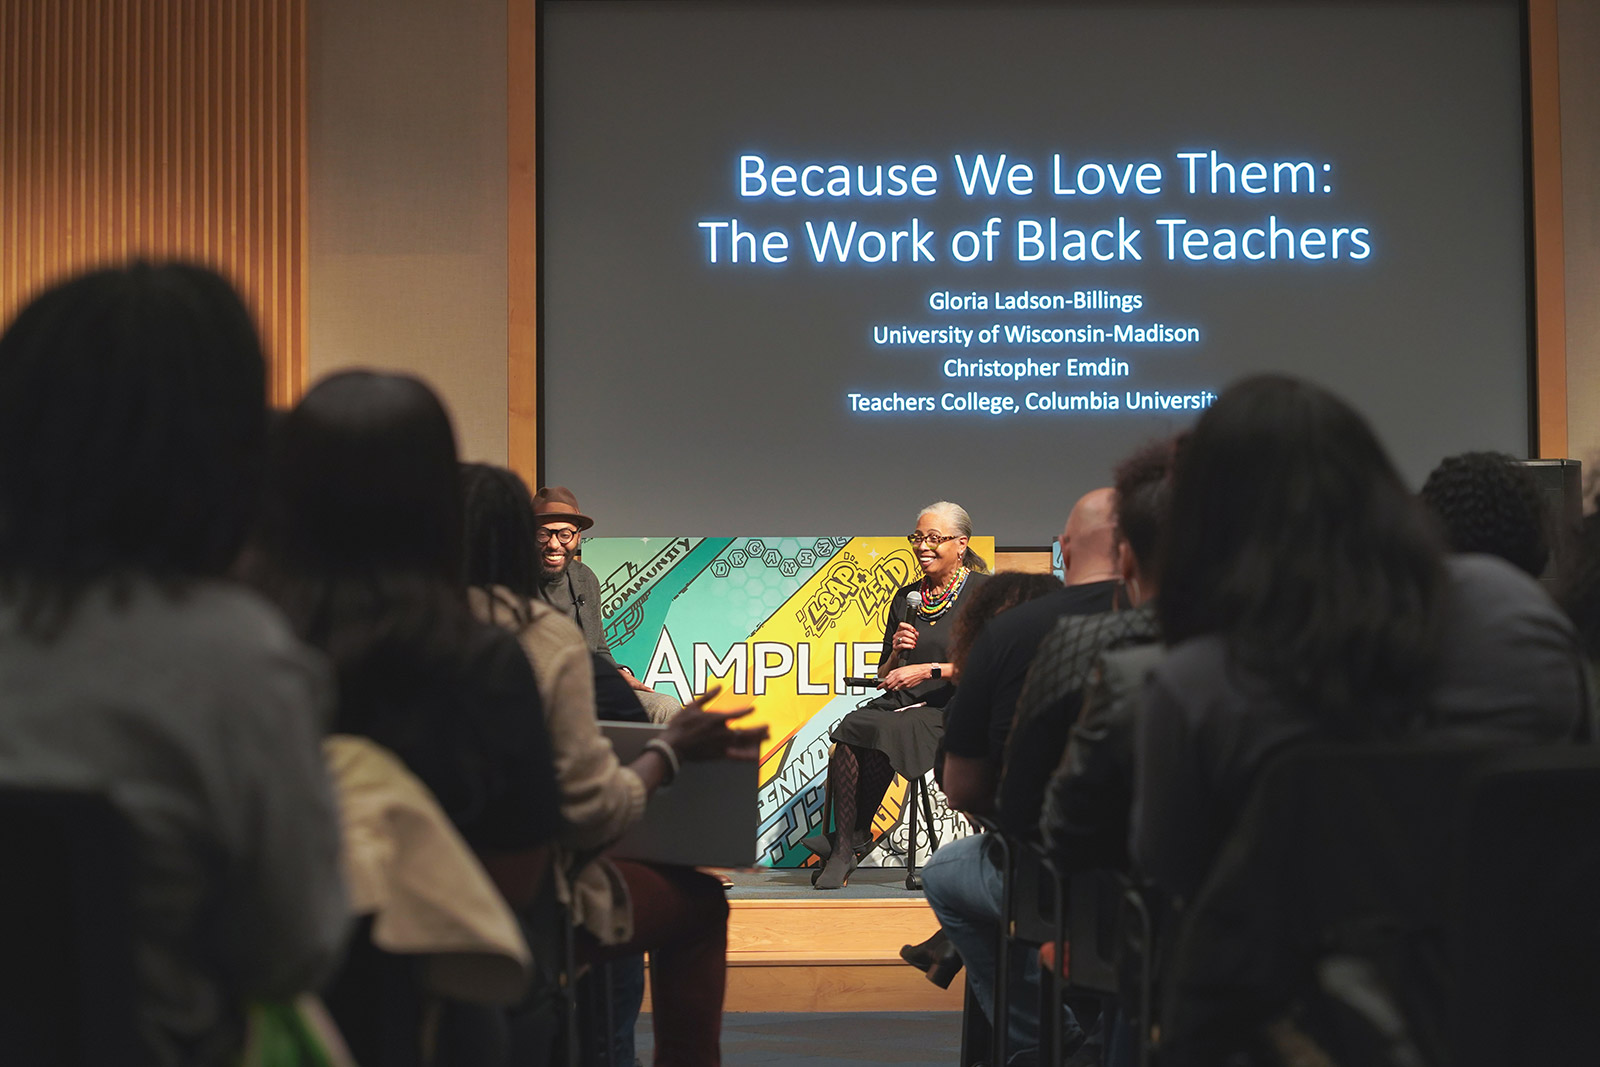 Dr. Christopher Emdin and Gloria Ladson-Billings facilitate a session at Amplify 2020. The screen behind them reads: "Because We Love Them: The Work of Black Teachers."